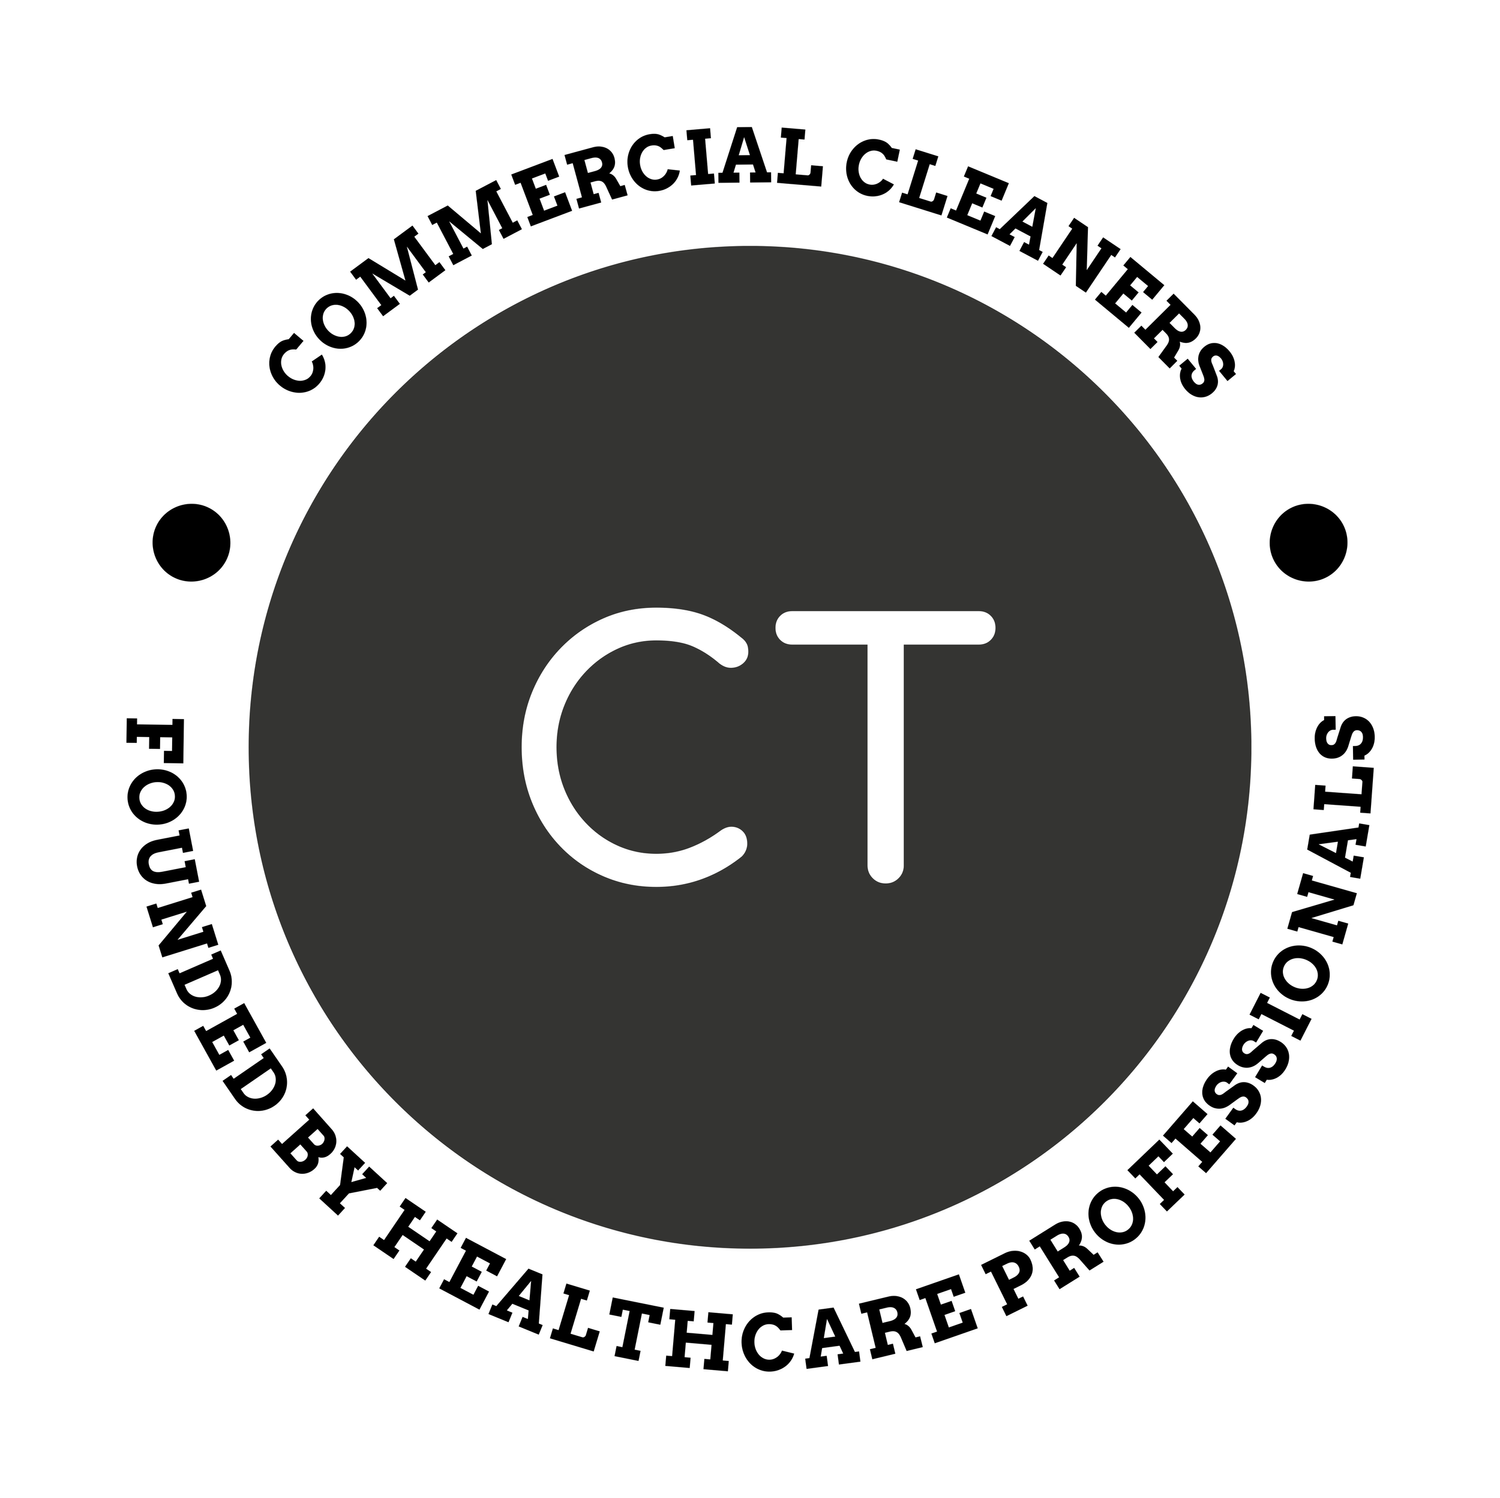 CT Commercial Cleaners